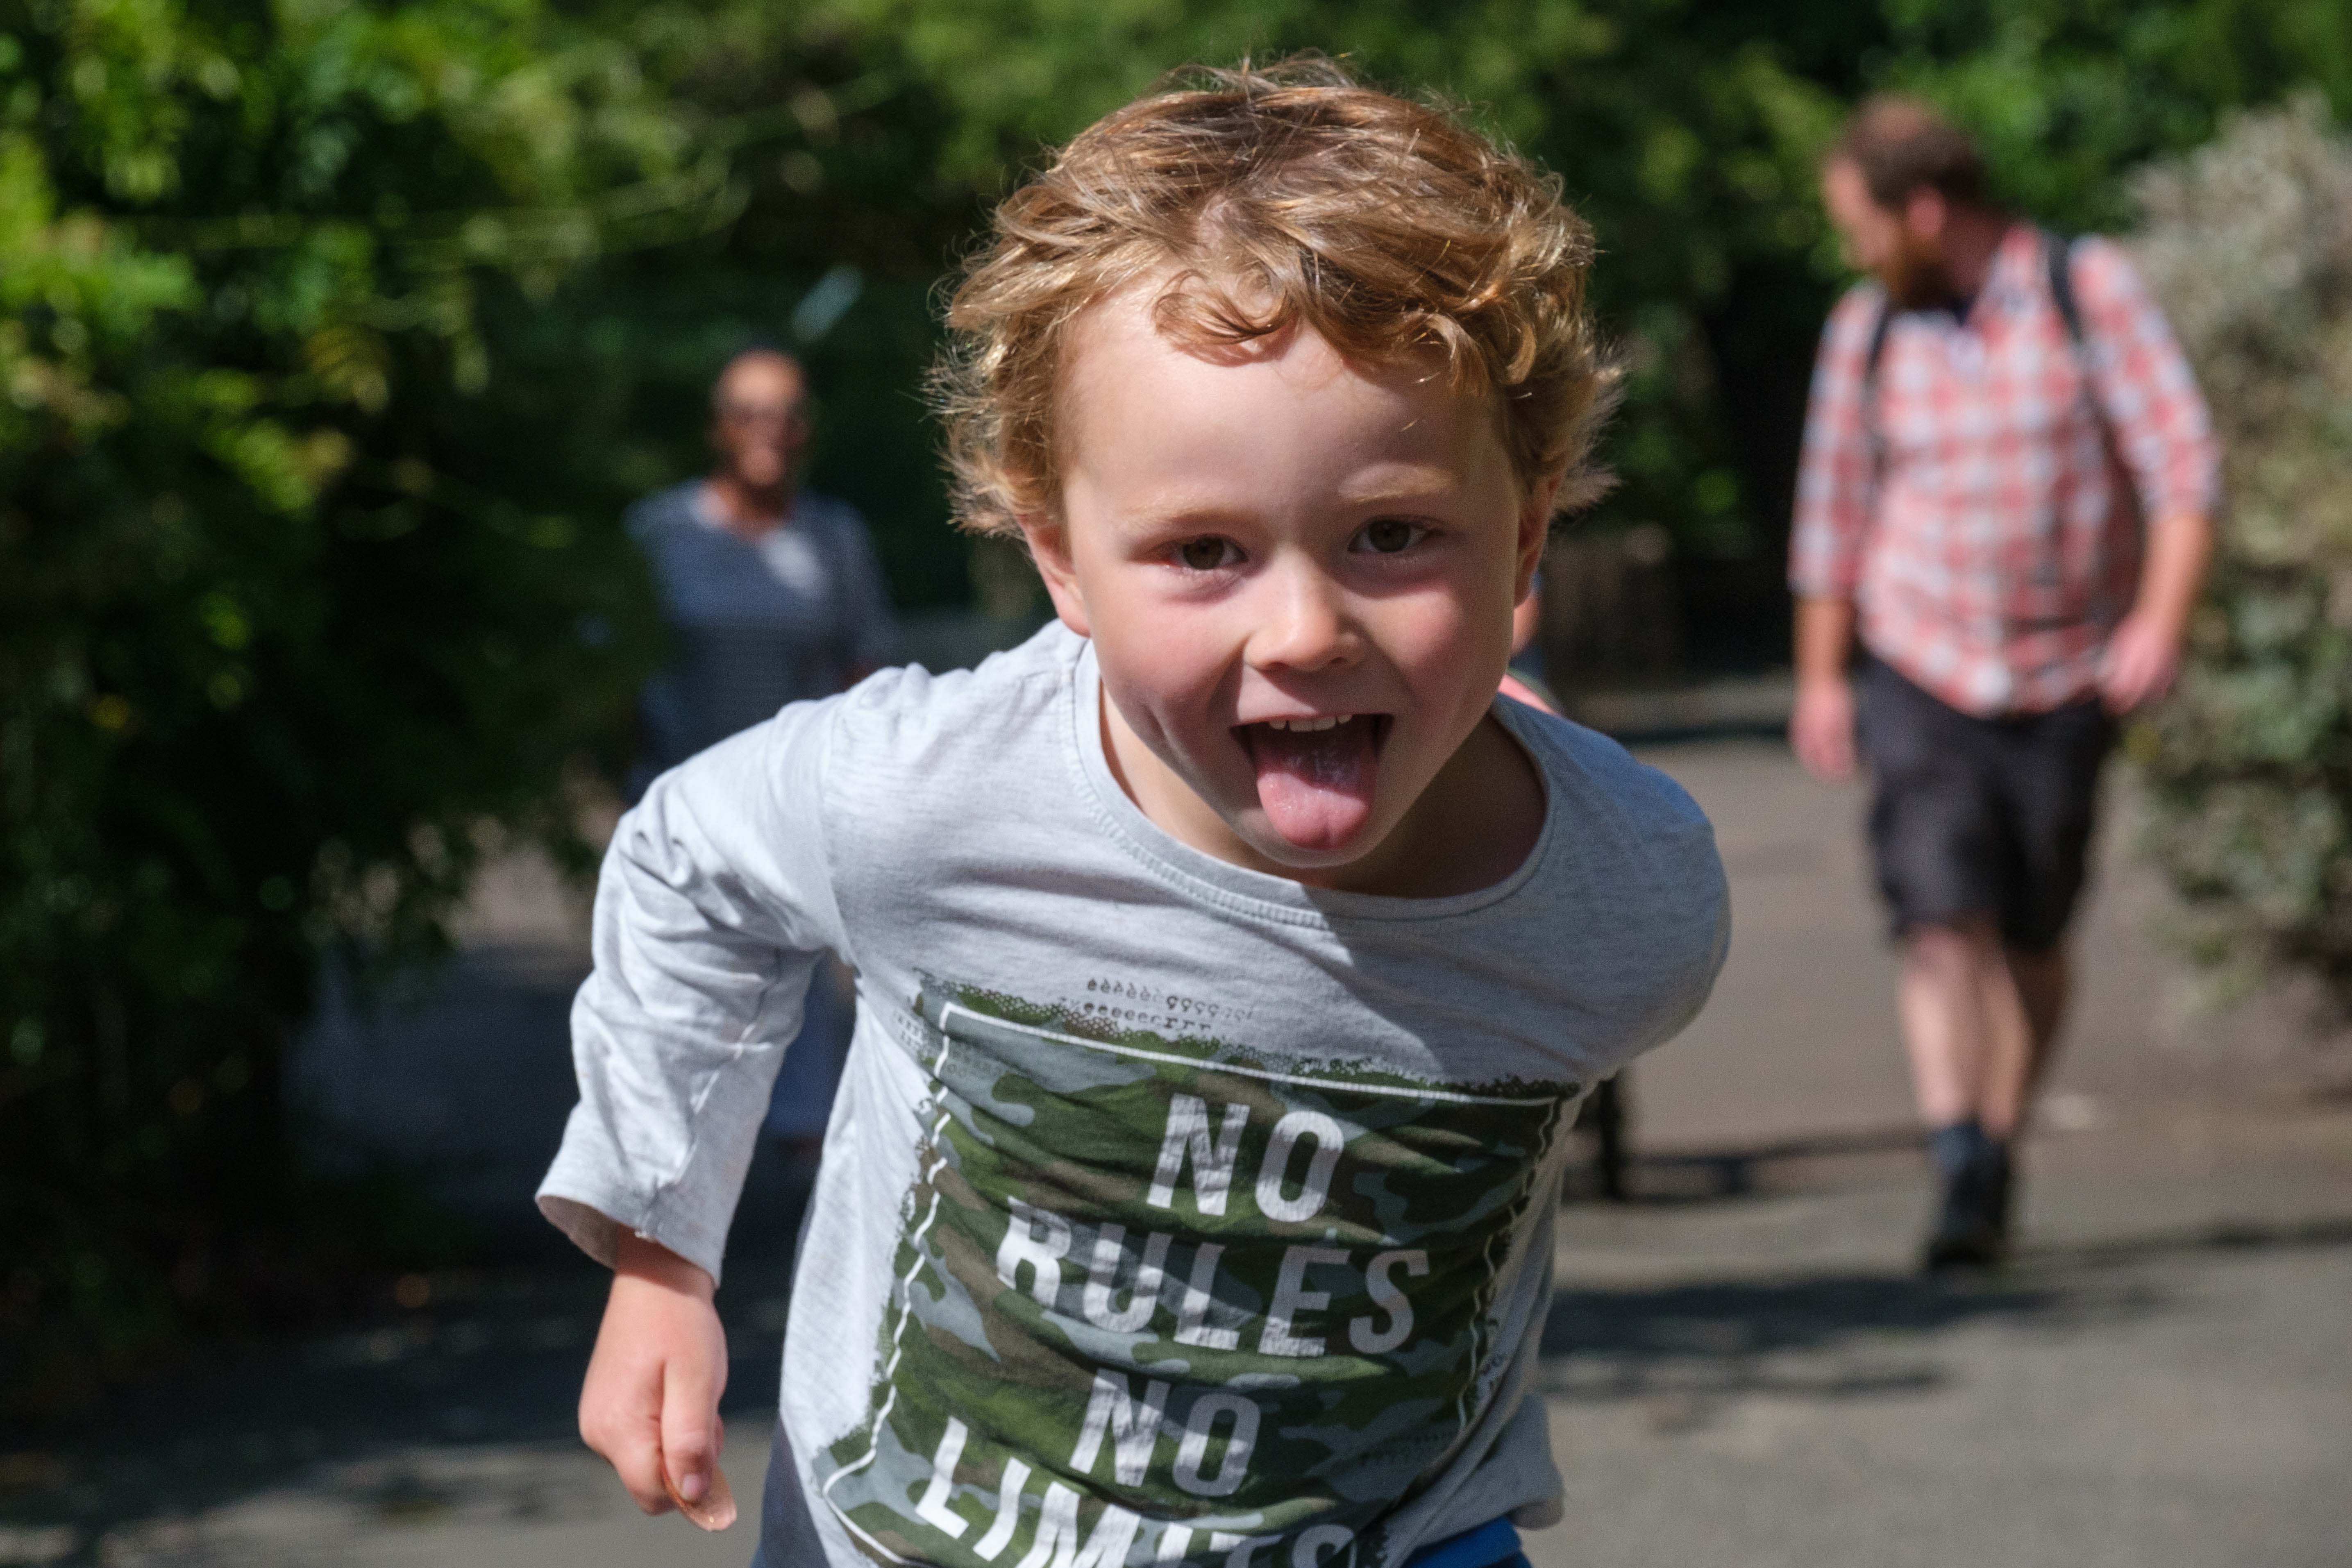 Child running towards camera with tongue out IMAGE: Robin Mair 2022